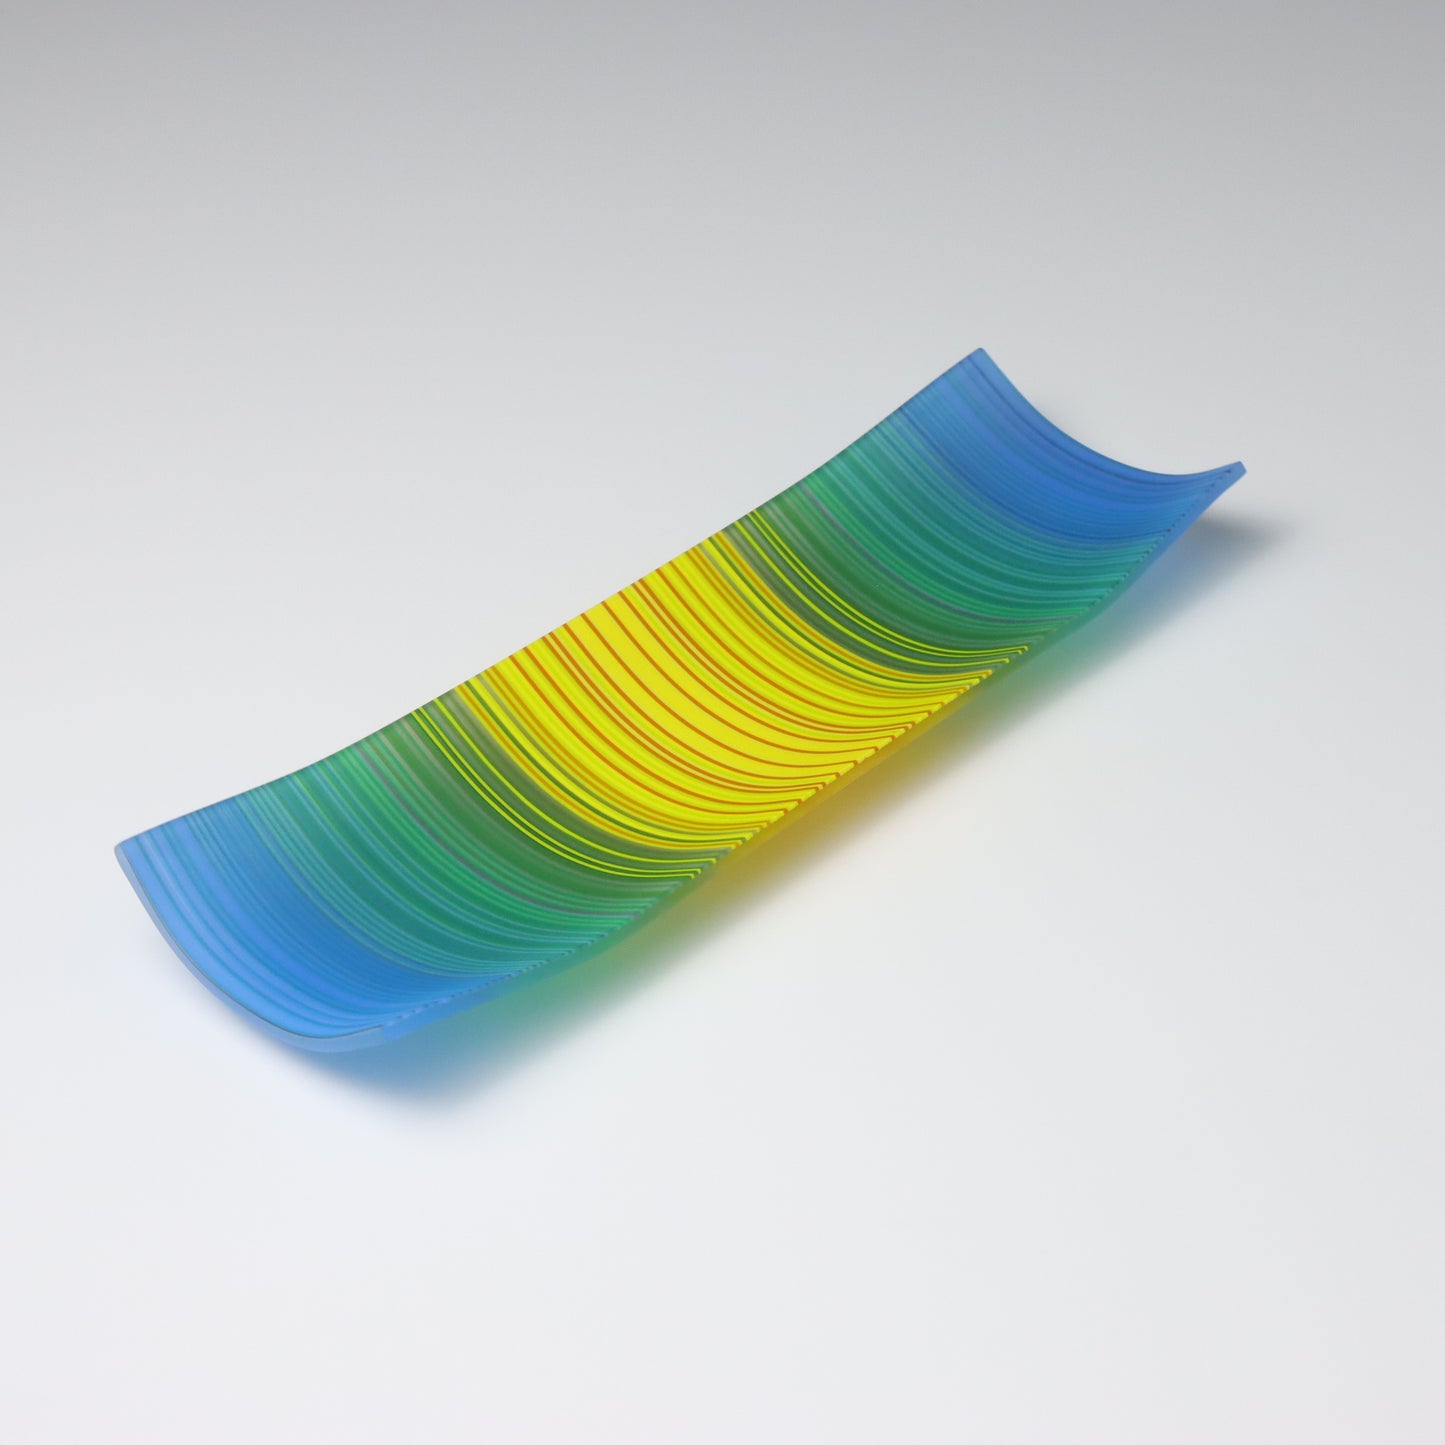 A decorative shallow rectangular boat shaped glass plate with raised corners and a  colourful ColourWave stripe patterns showing key colours of bright blues, greens and yellow